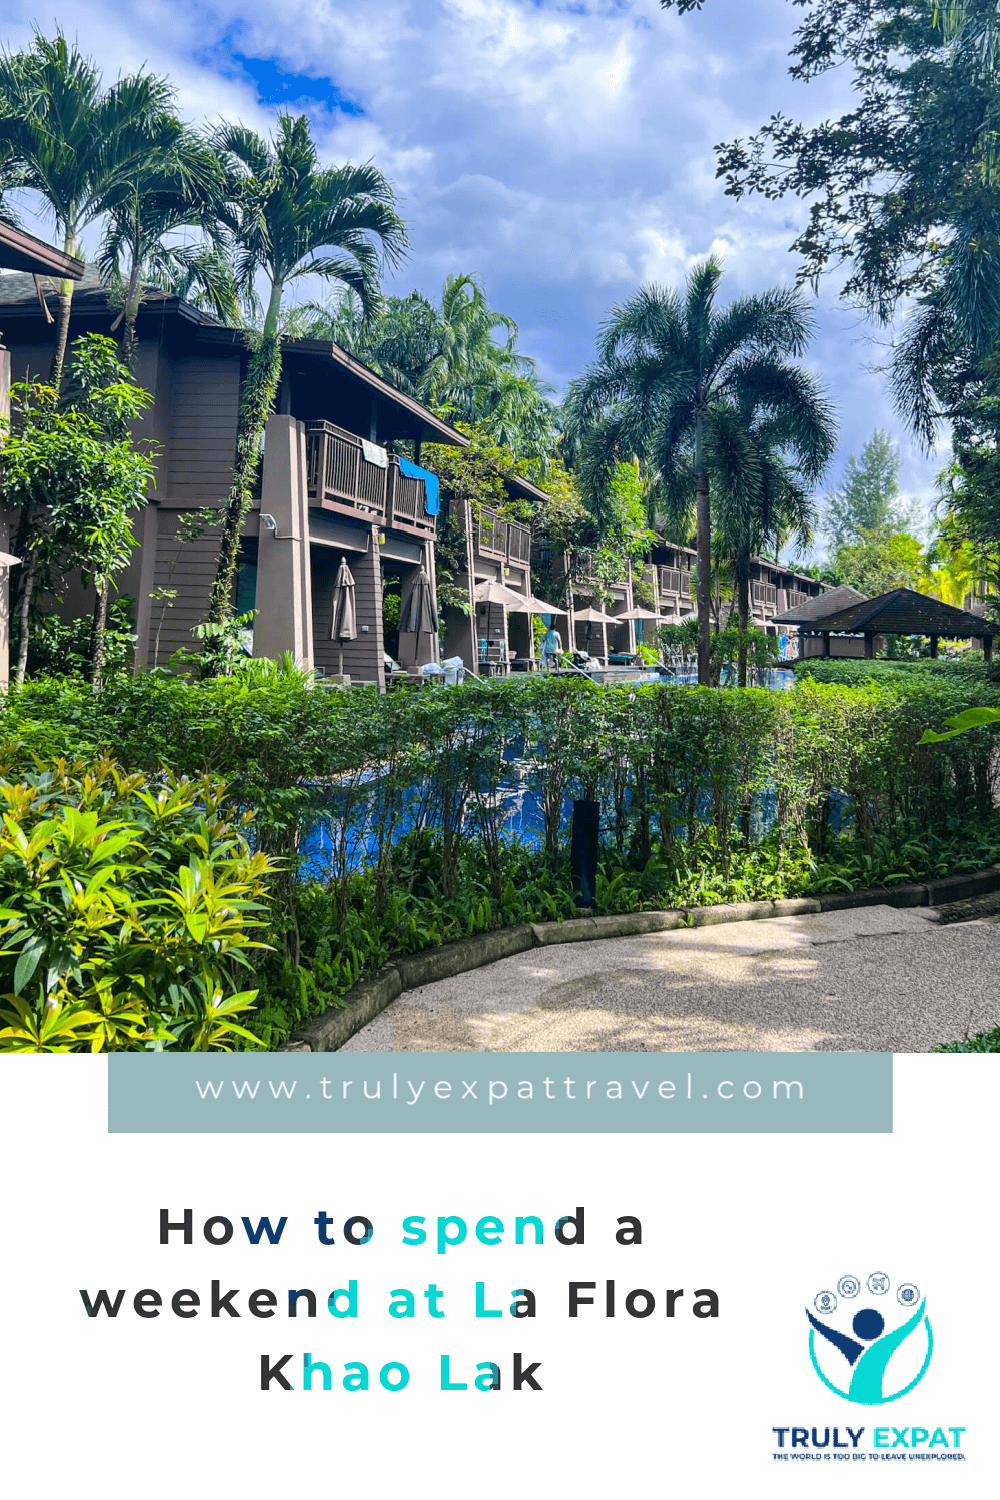 How to spend a weekend at La Flora Khao Lak